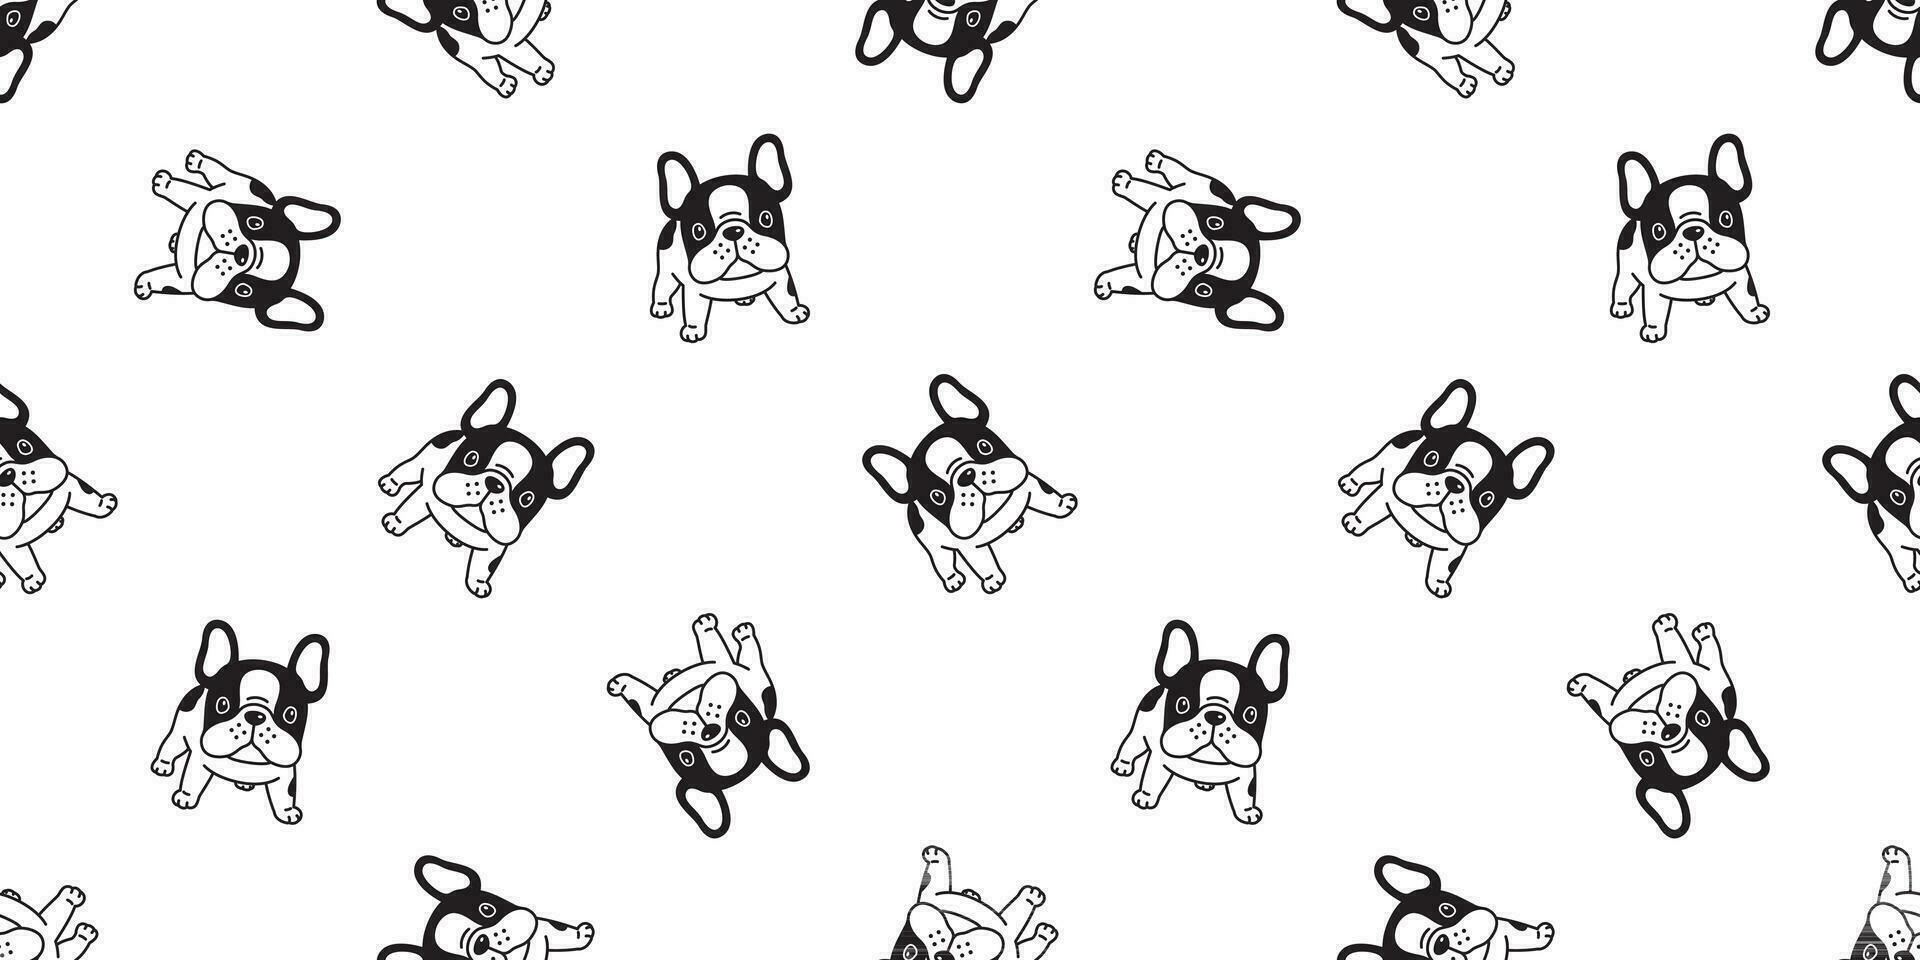 Dog seamless pattern french bulldog vector isolated cartoon scarf repeat wallpaper tile background doodle black